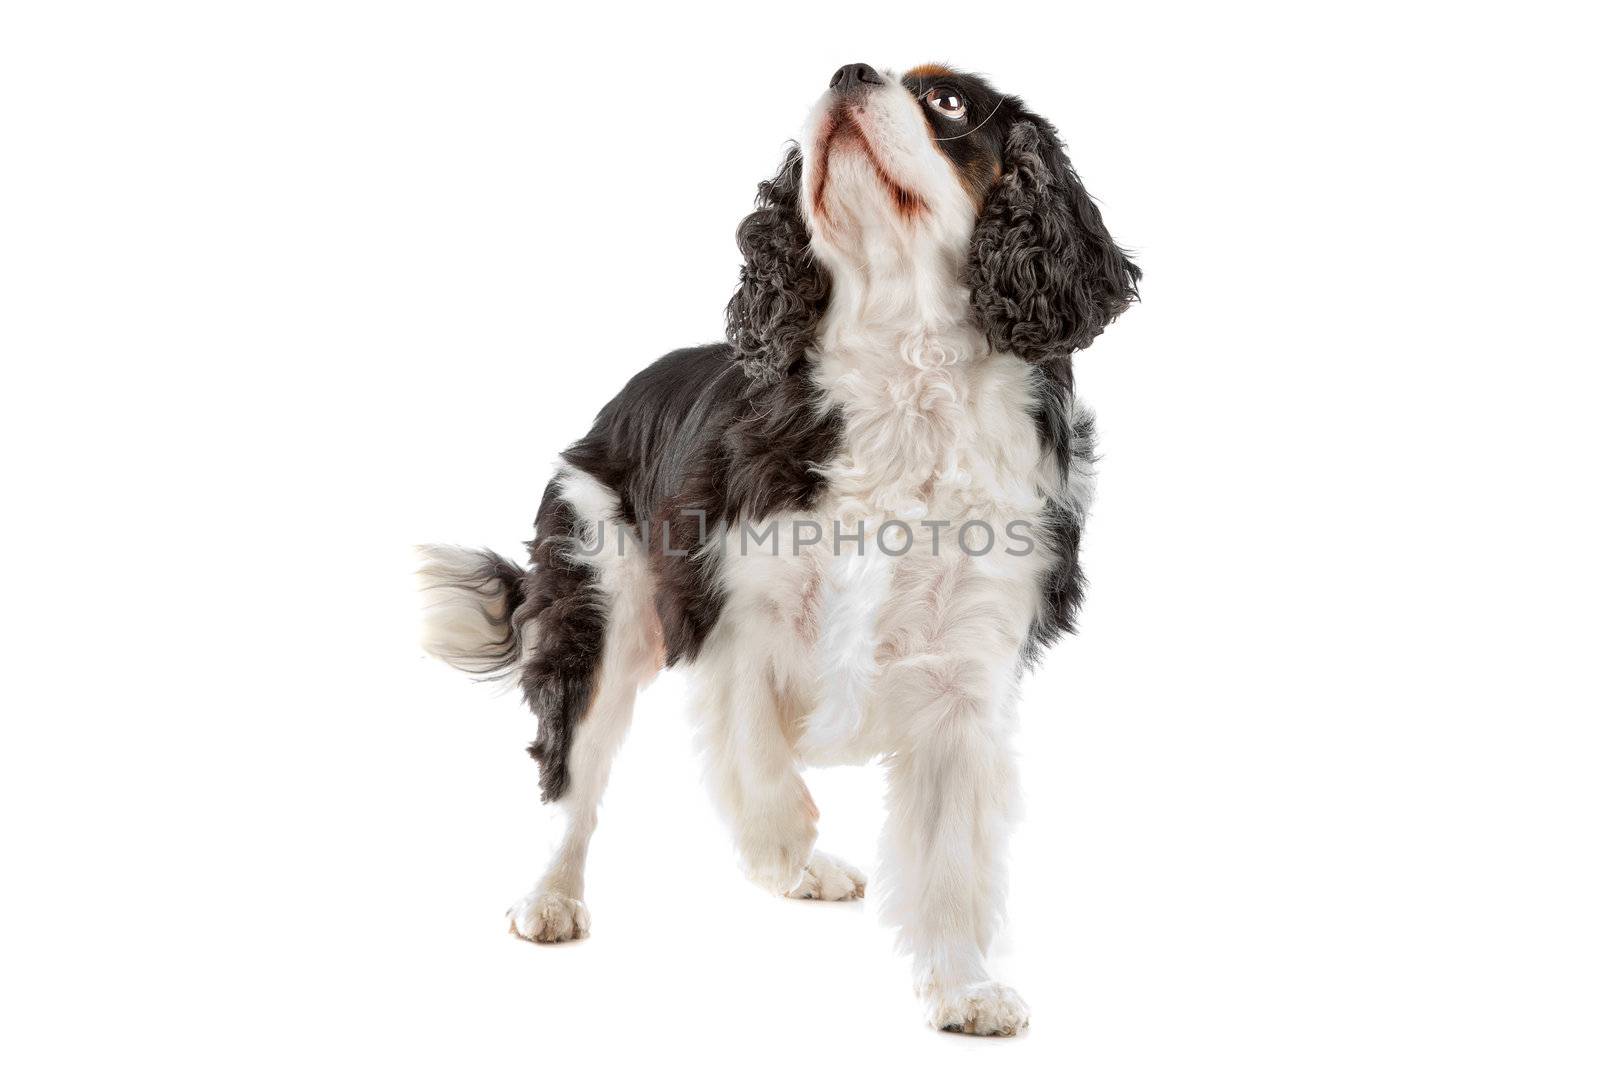 Cute Cavalier King Charles Spaniel dog on a white background